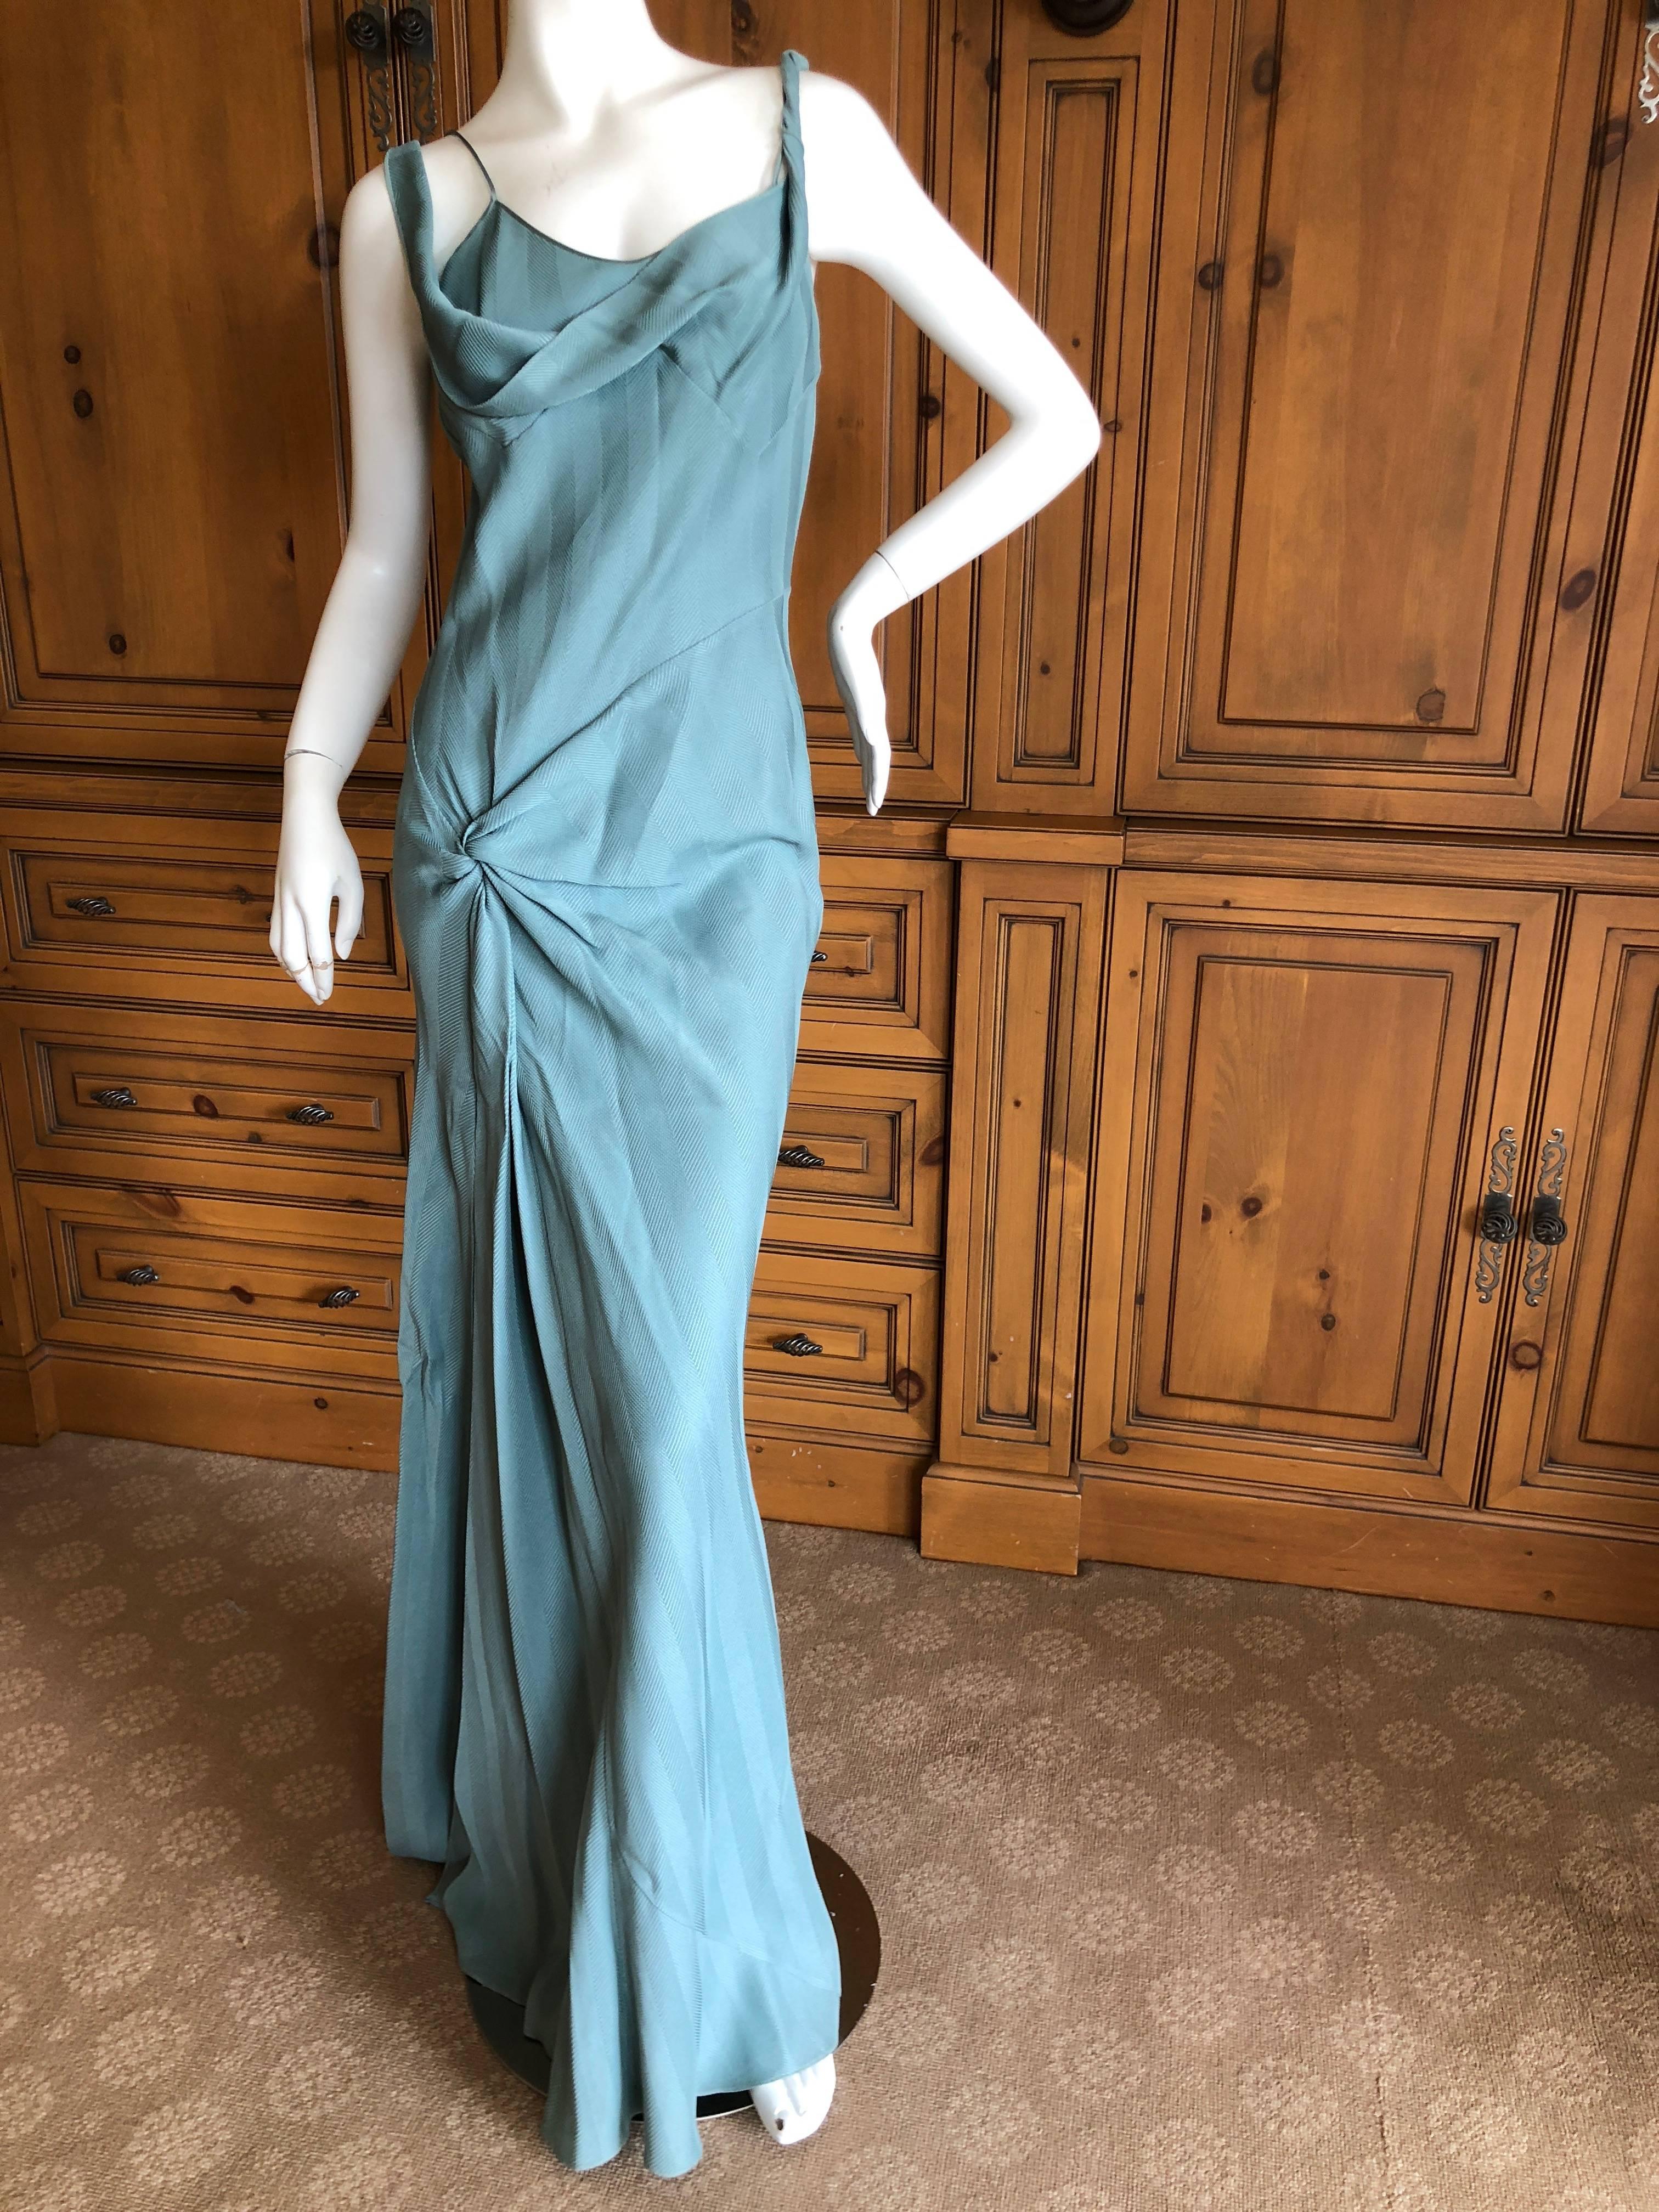 John Galliano Superb Nineties Blue Twill Bias Cut Evening Dress.
This is so beautiful, please see all the photos.
 Size 40 French
Bust 38